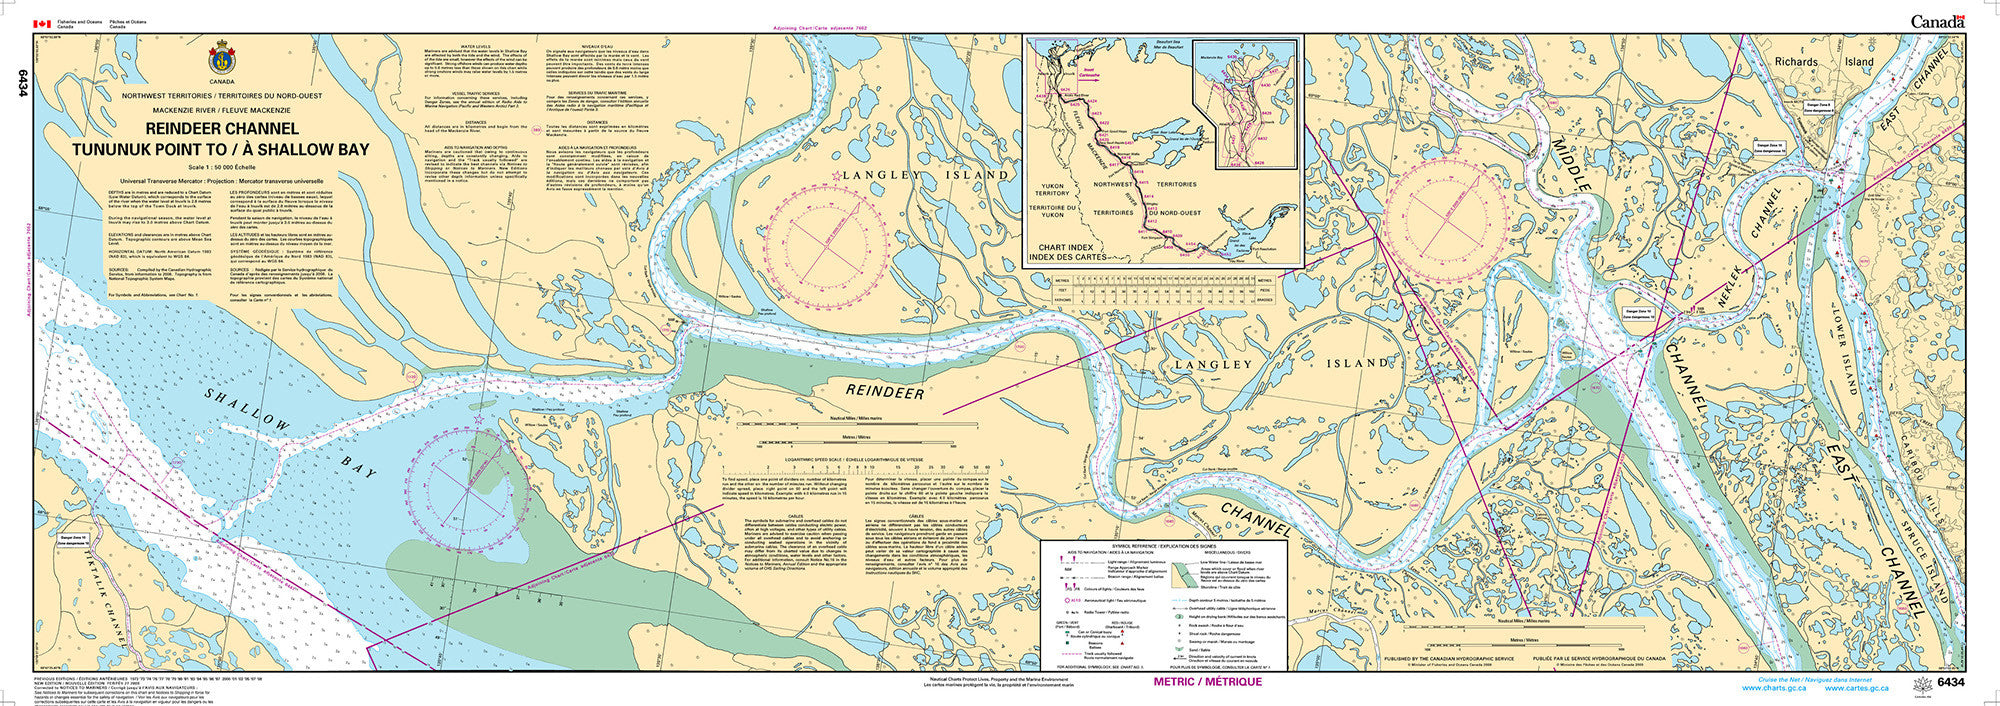 Canadian Hydrographic Service Nautical Chart CHS6434: Reindeer Channel, Tununuk Point to/à Shallow Bay